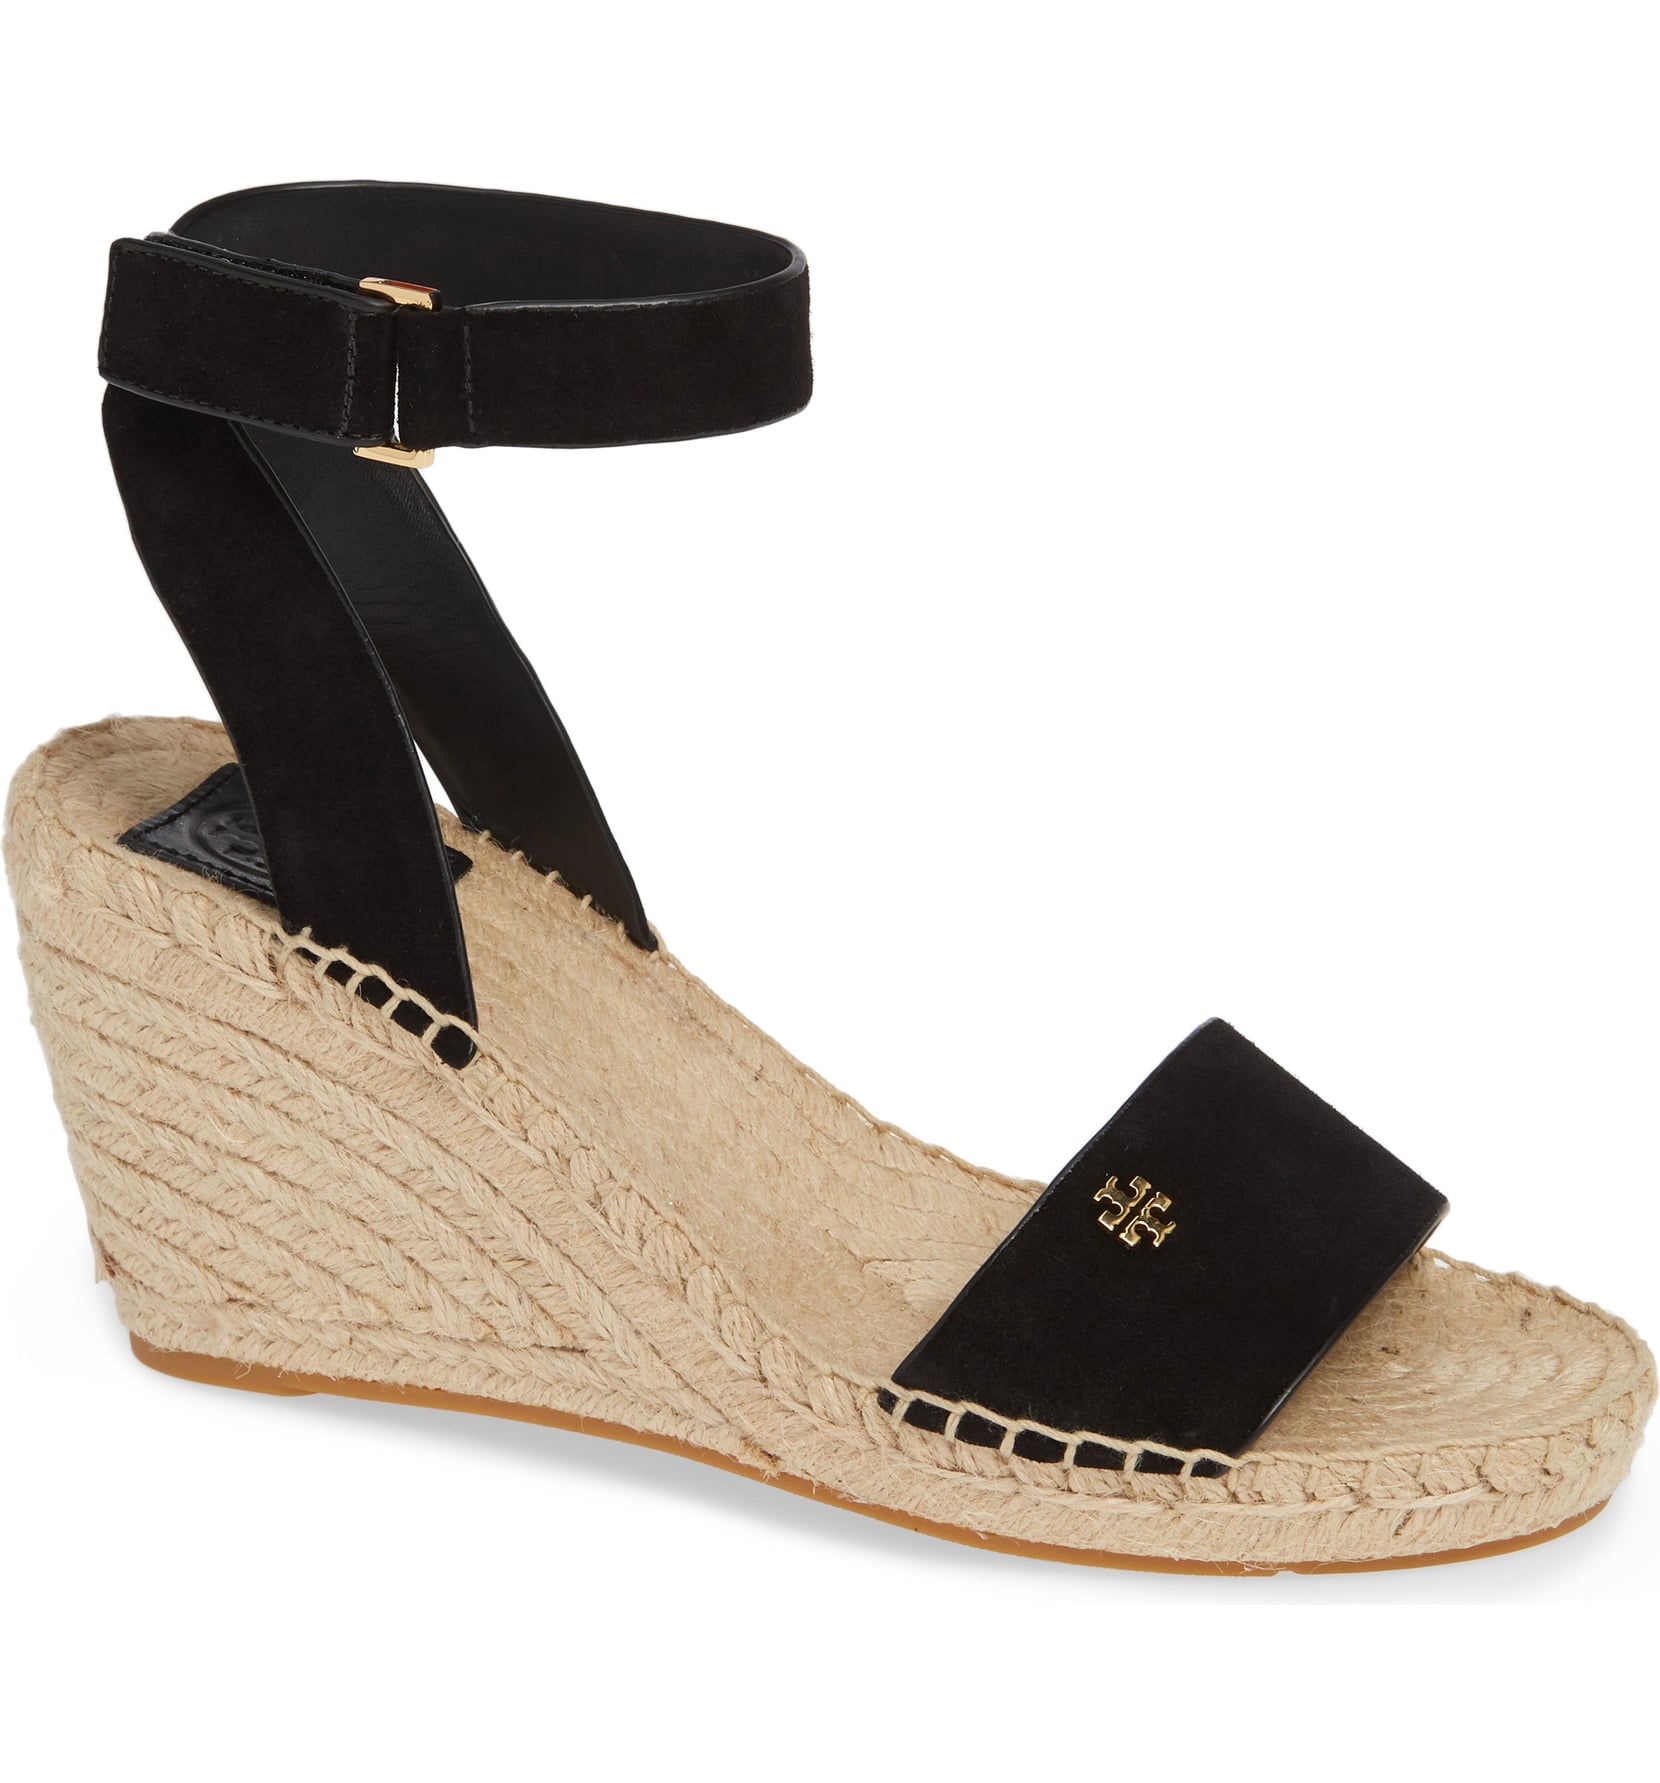 Tory Burch Bima 2 Espadrilles | Nordstrom's BIG Pre-Summer Sale Is Here,  and These 19 Deals Should Be on Your Radar | POPSUGAR Fashion Photo 4